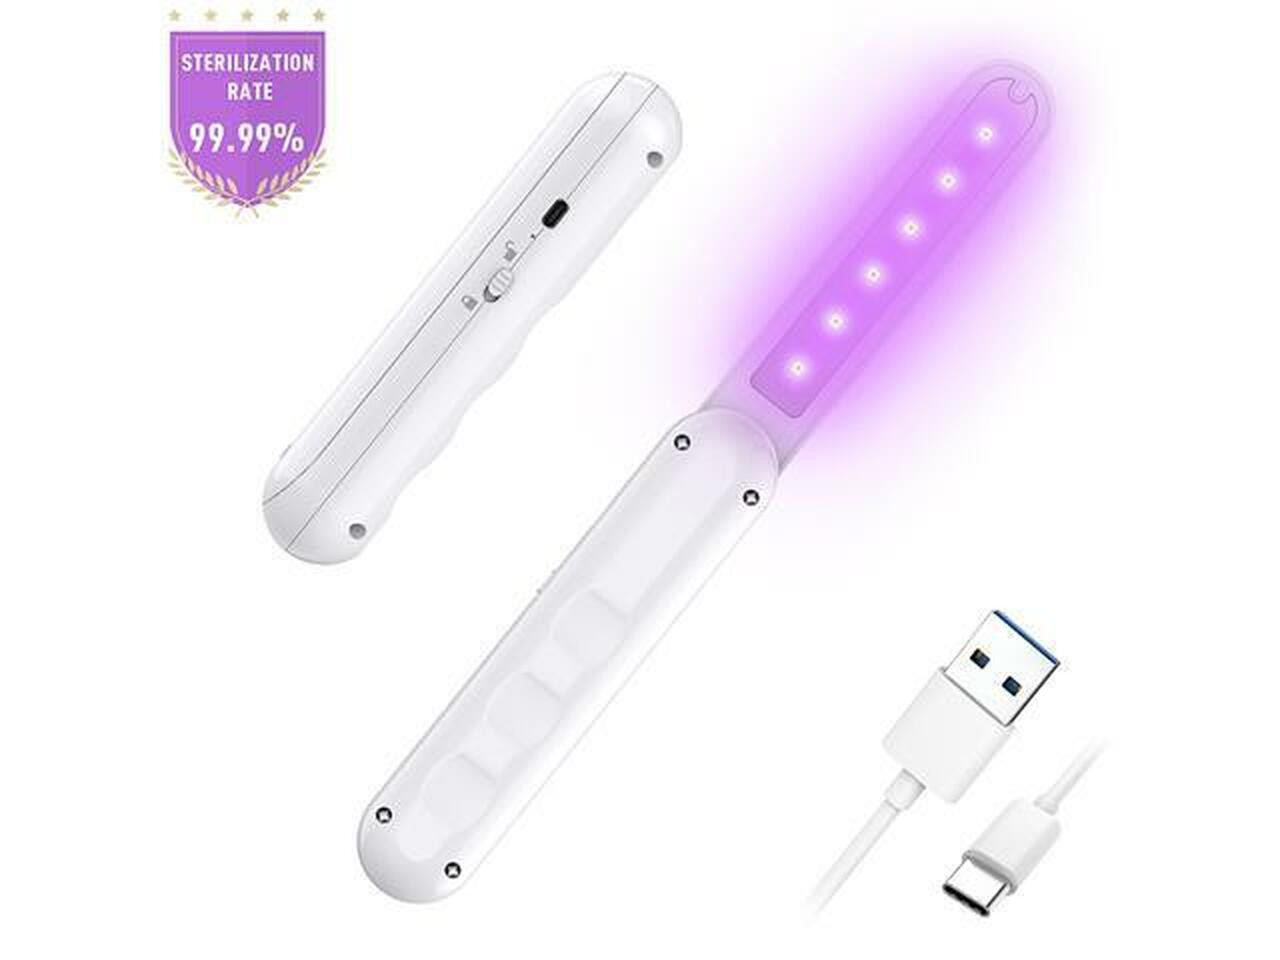 Rechargeable UVC LED Ultraviolet Handheld Sterilization Lamp Eye Protection - Bicycle-Engines.com